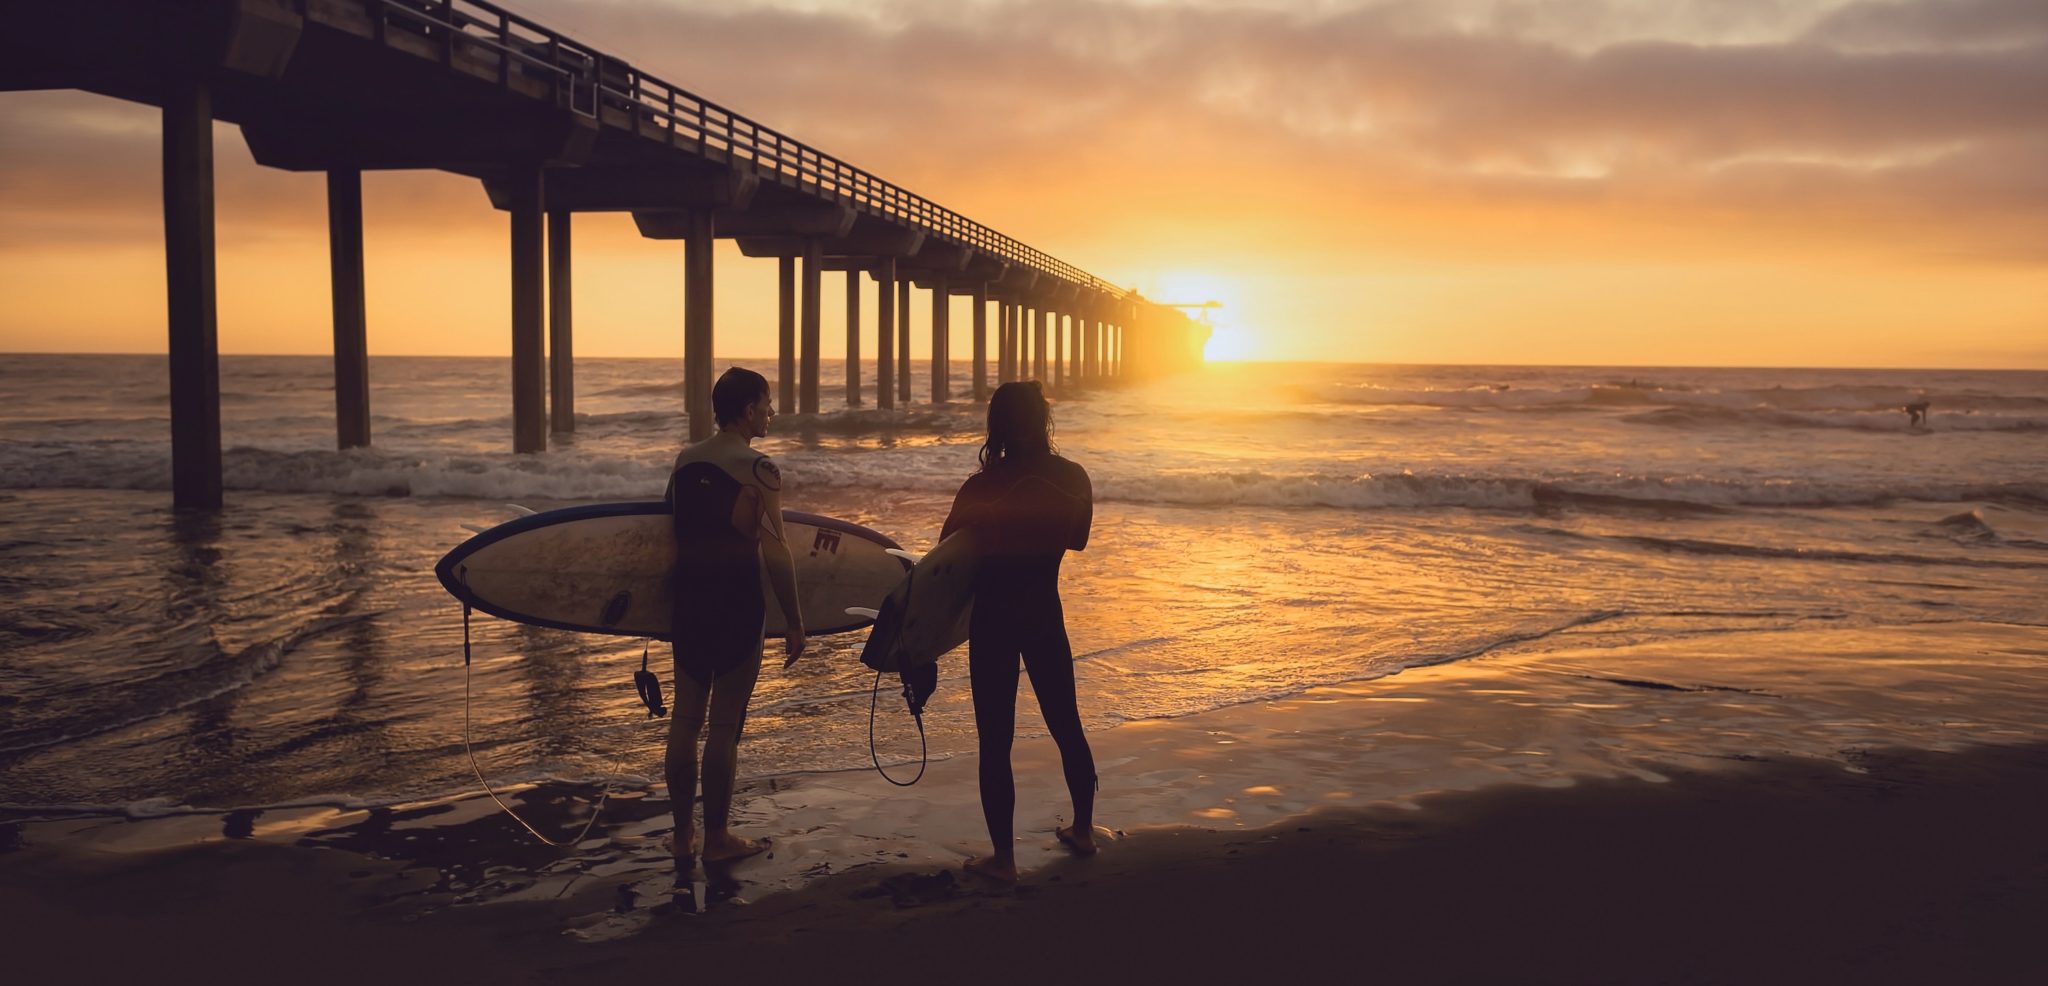 2 people, one holding a surfboard, looking out at the ocean at sunset